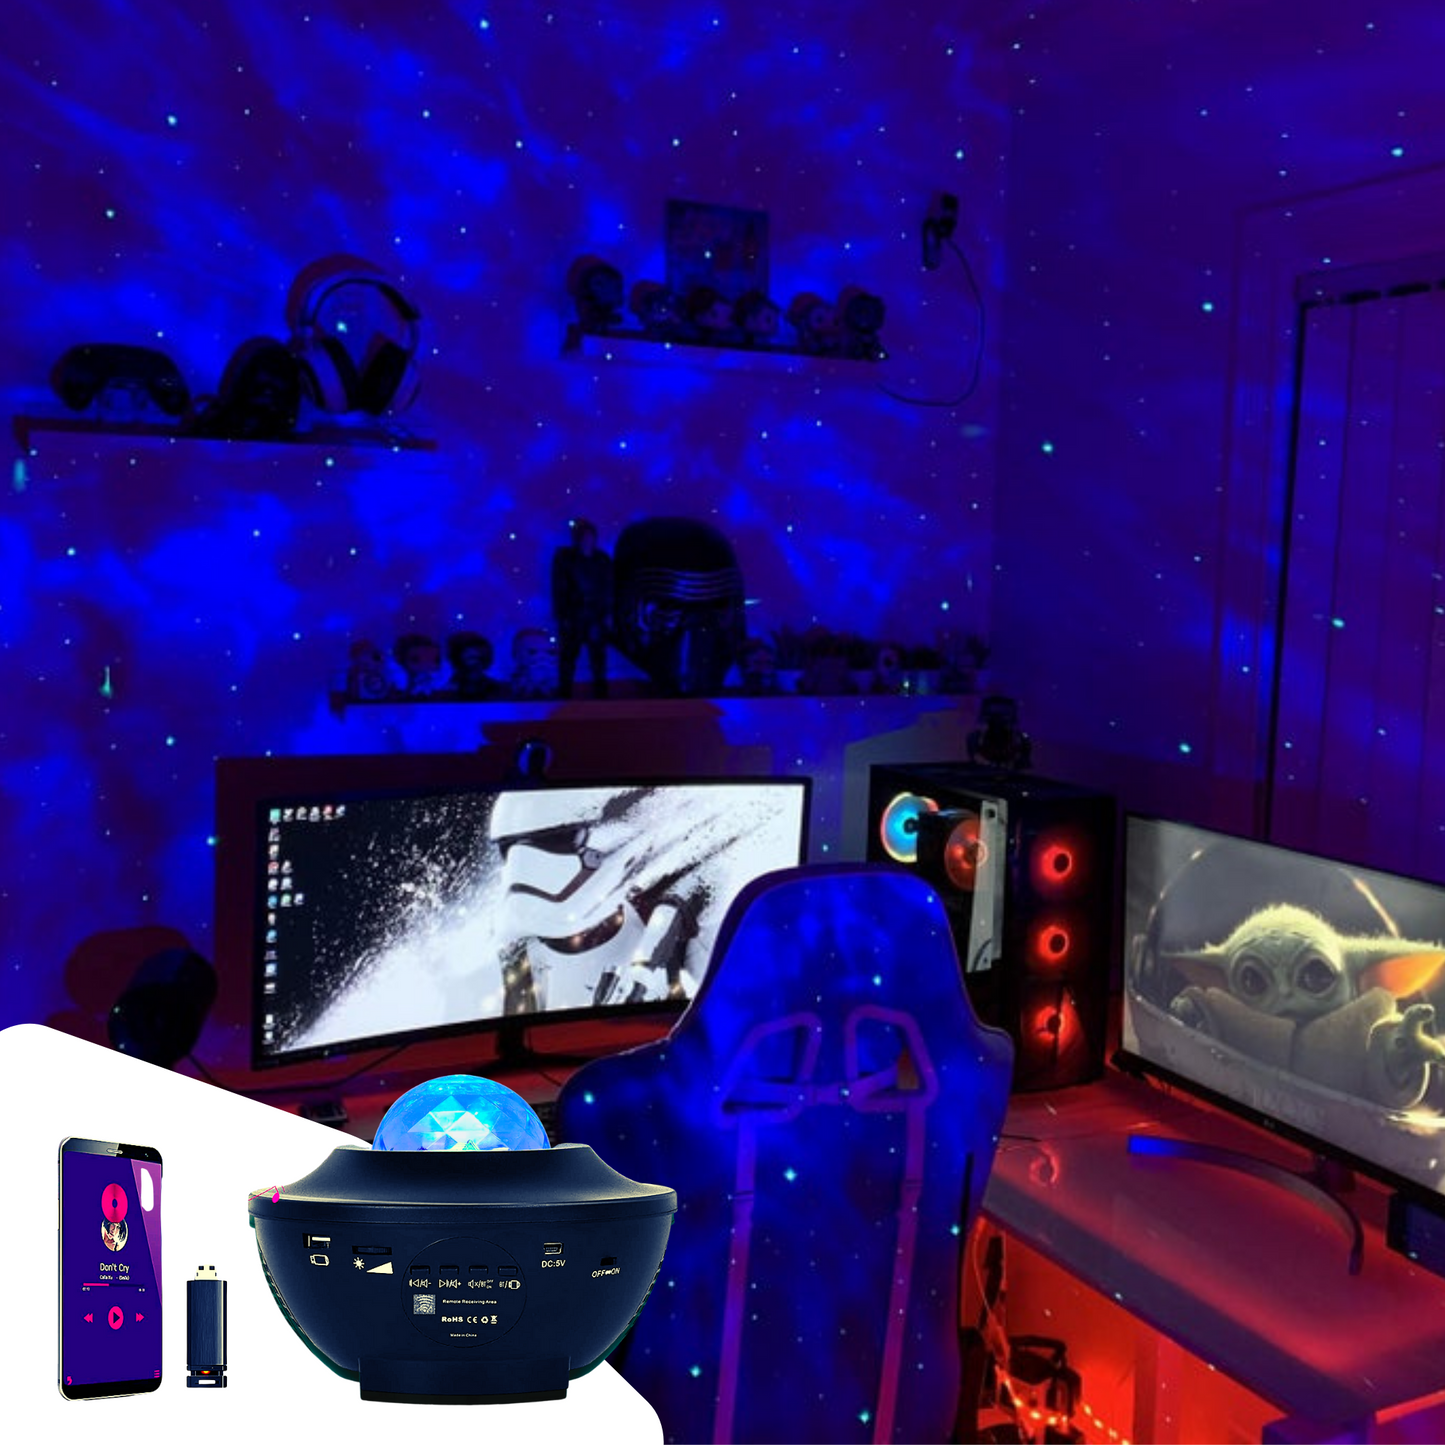 NEW! Gaming Room Galaxy LED Projector